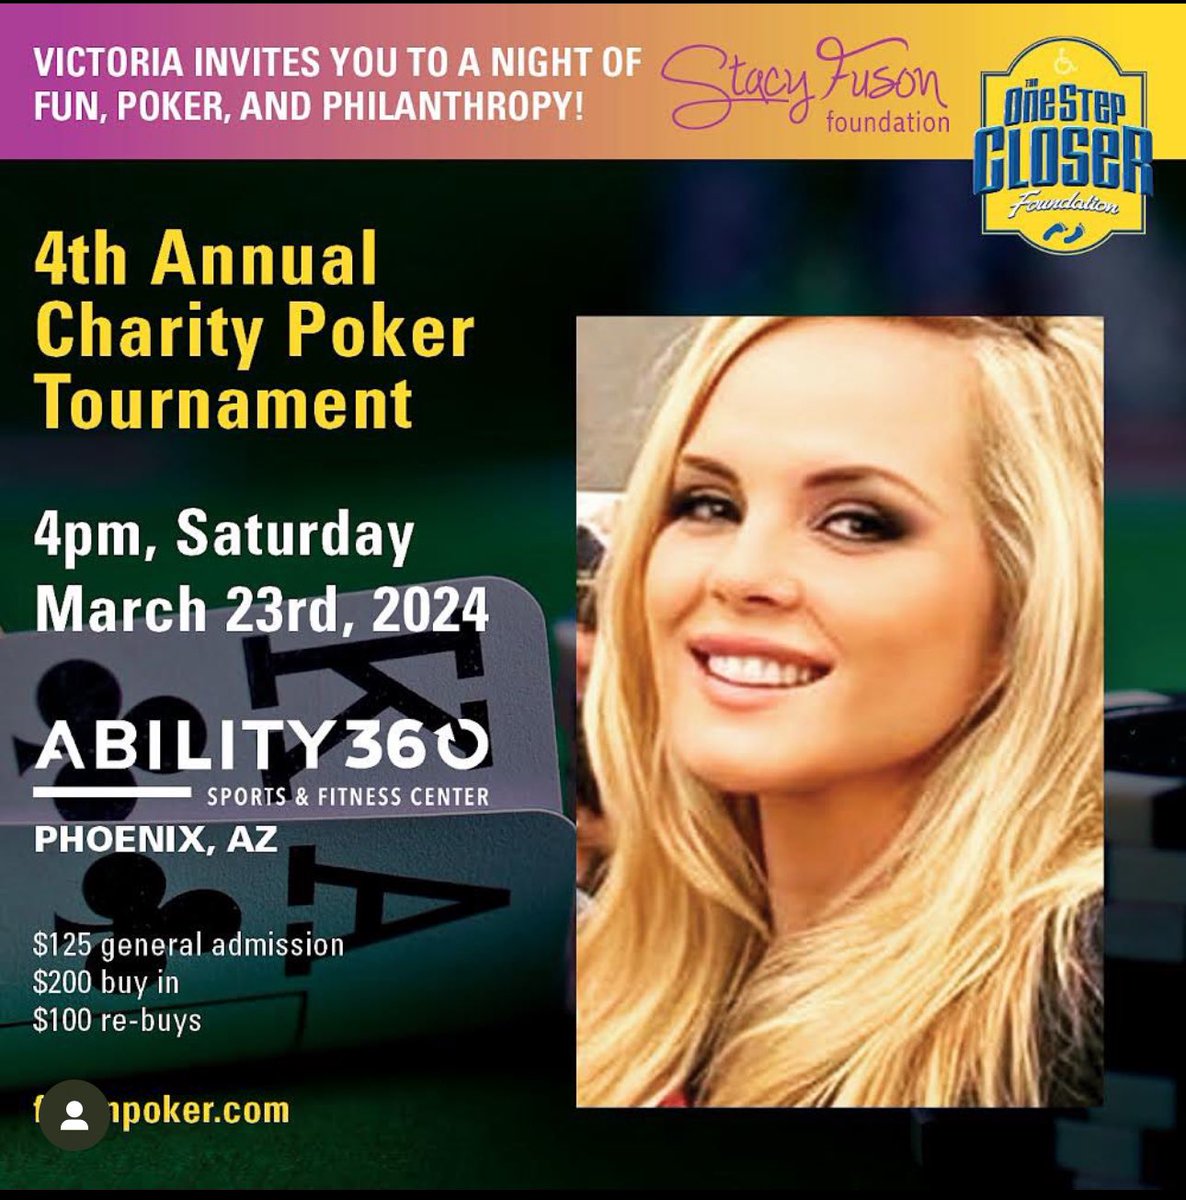 Help support our Rogue Bunny @vitaminsbystacy and her foundation by visiting the link below! A few #RogueBunnies will be in attendance including @NFTBUNNY and @AlyWaite & @RPomplun 🔗Fusonpoker.com